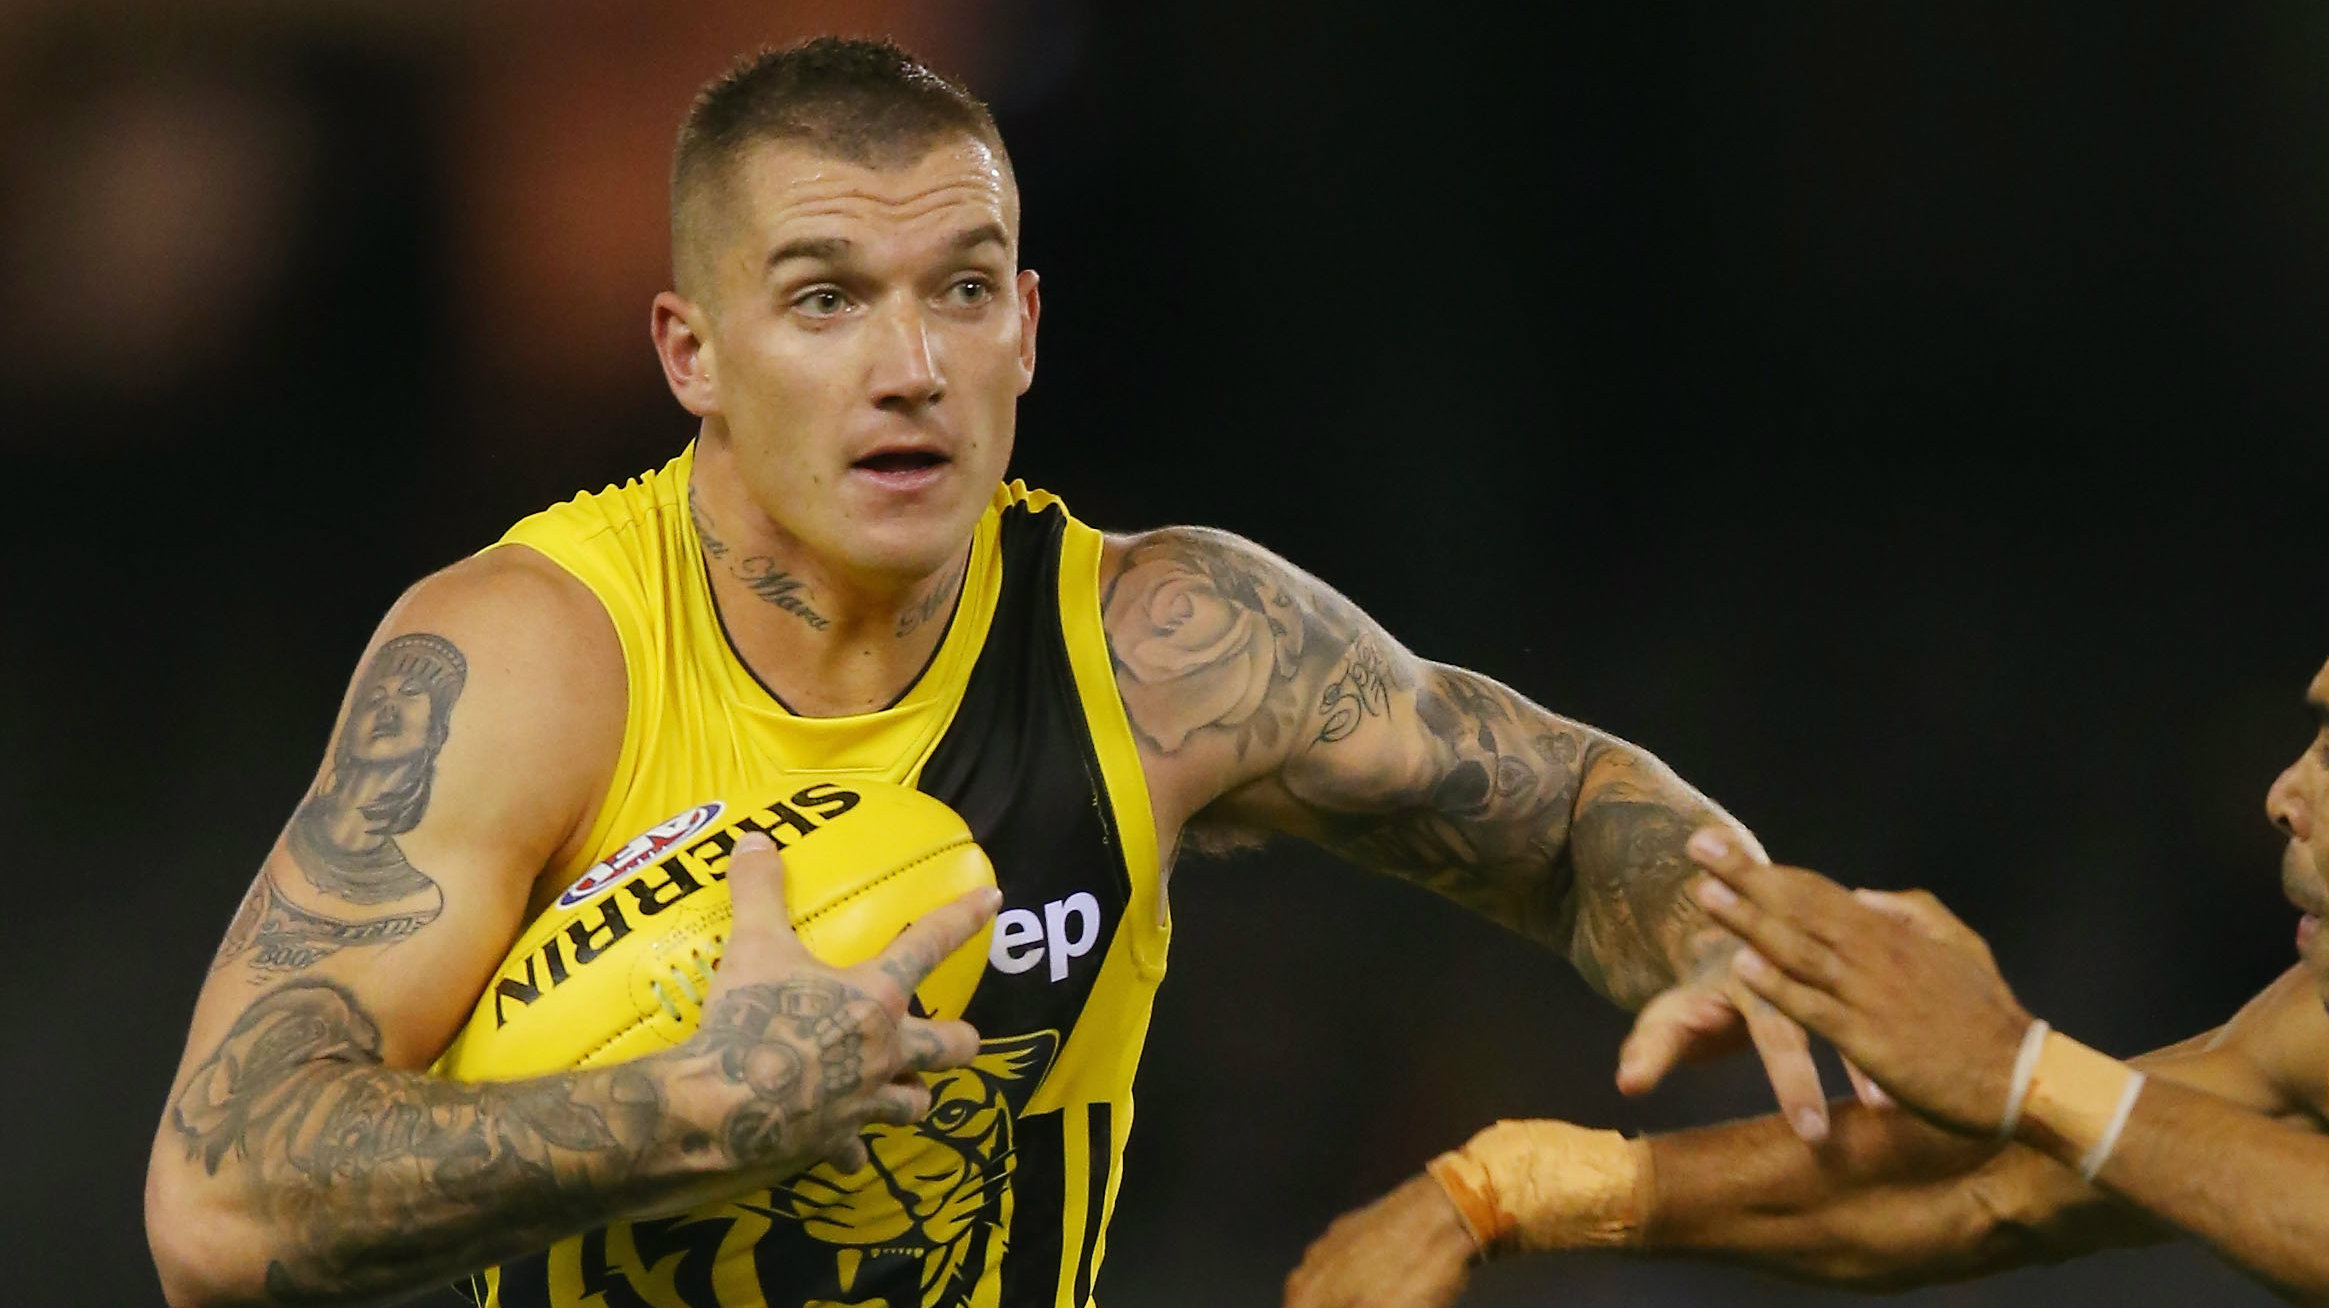 School says 'no entry' to Richmond players | AFL | Sporting News - Sporting News